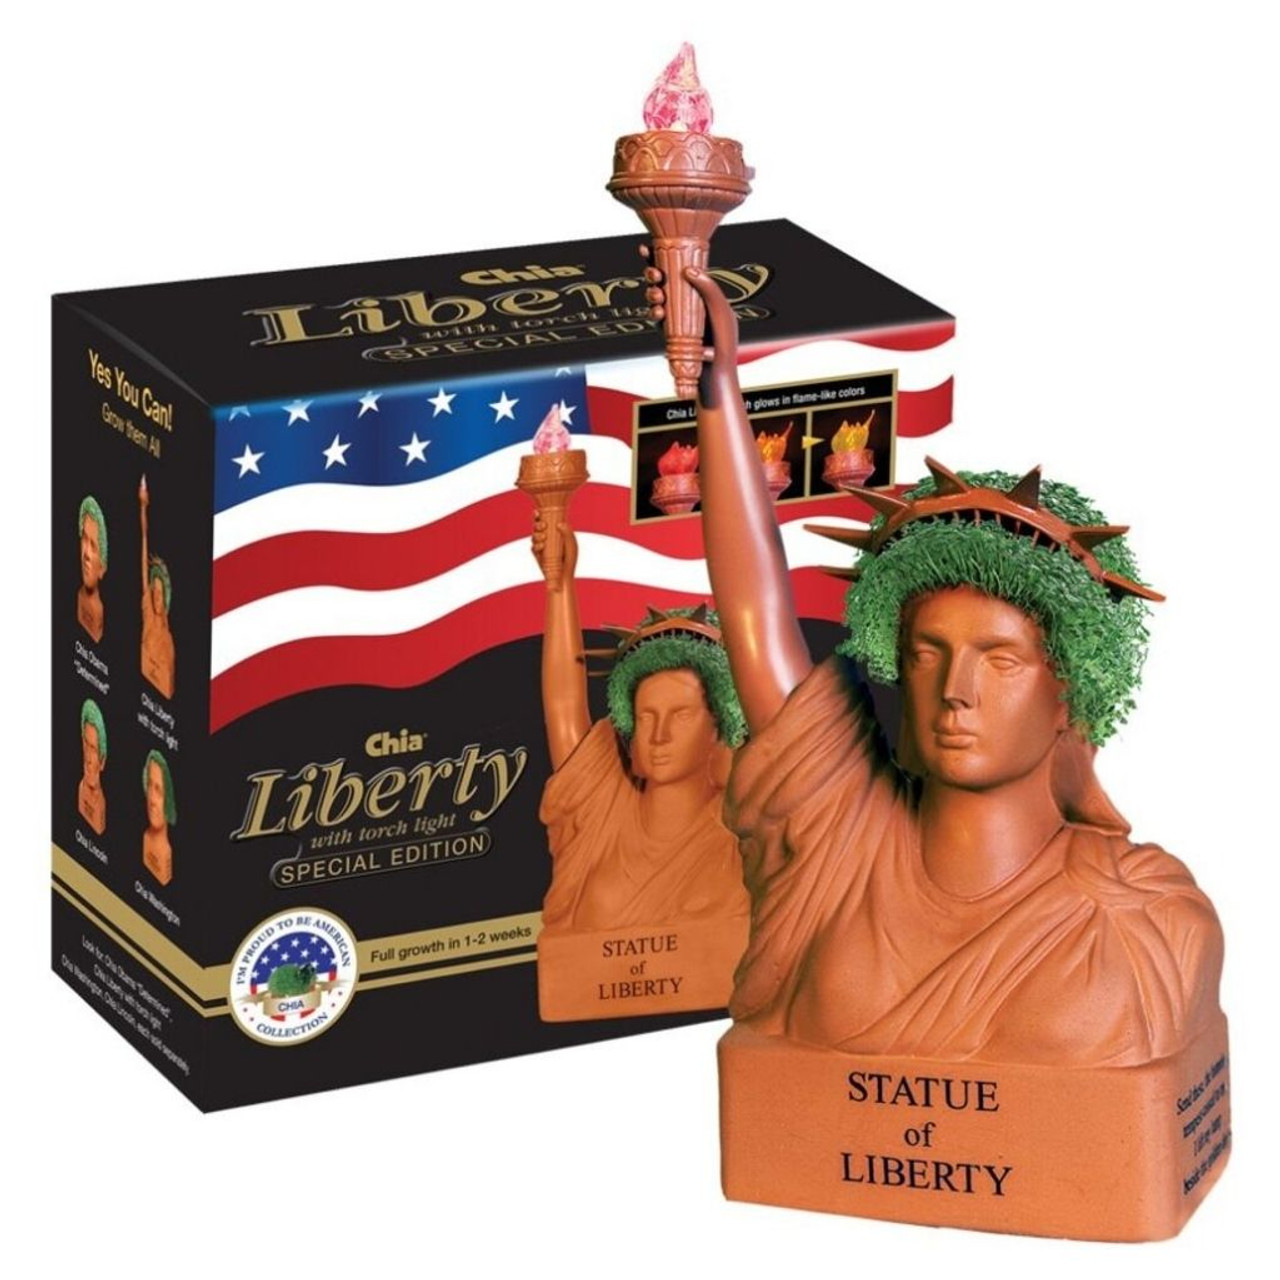 Chia® Liberty with Torch Light Special Edition Plant product image